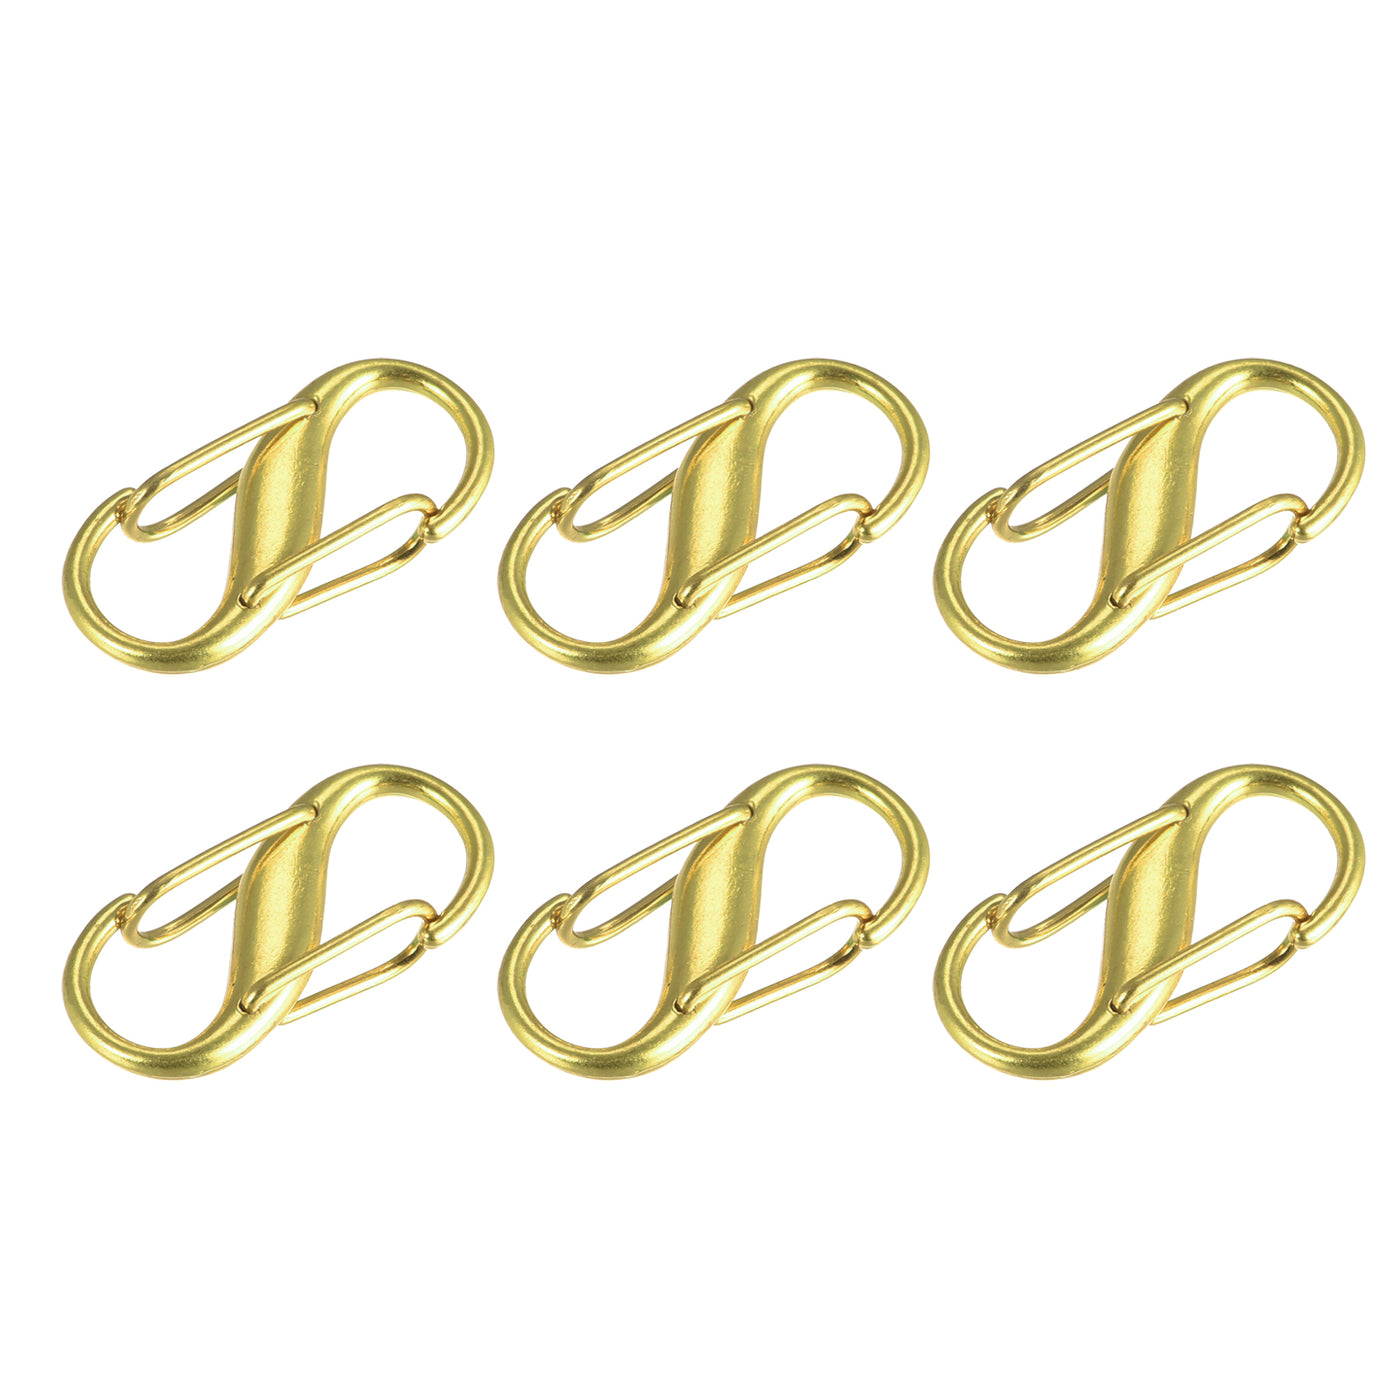 uxcell Uxcell Adjustable Metal Buckle for Chain Strap, 6Pcs 27x13mm Chain Shortener, Champagne